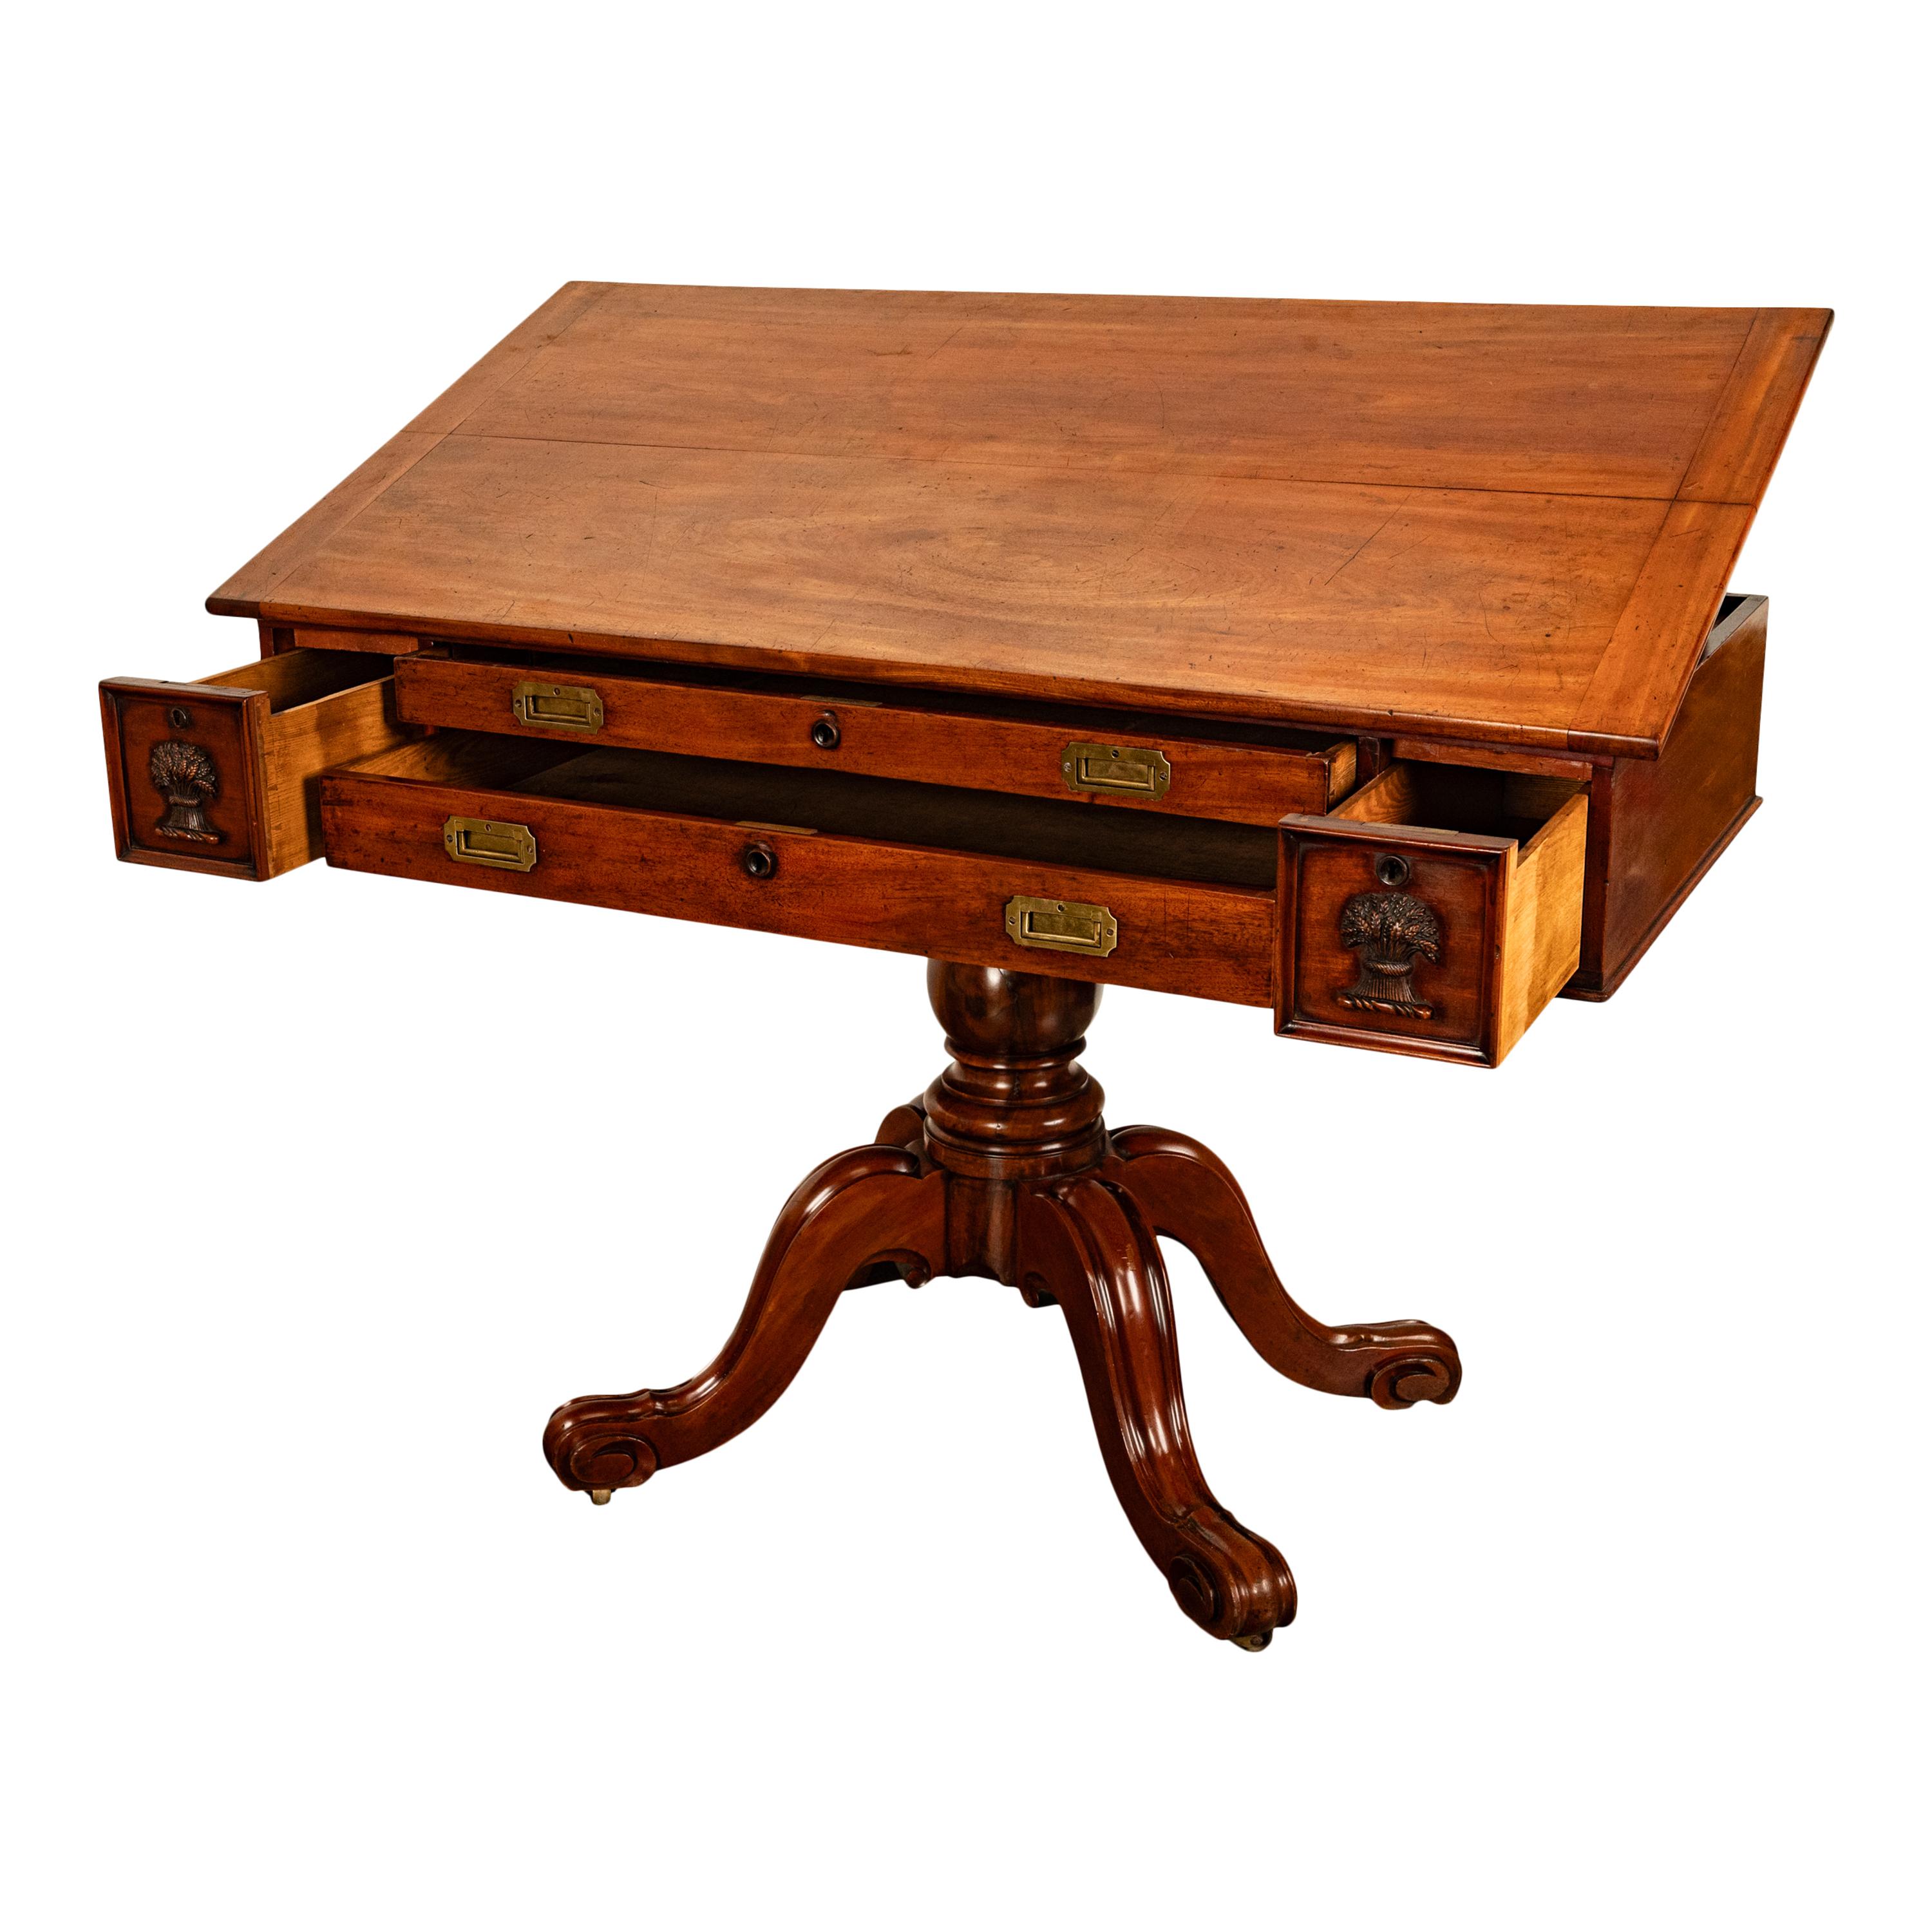 Carved Antique 19th Century Architect's Mahogany Pedestal Desk Drafting Table 1870 For Sale